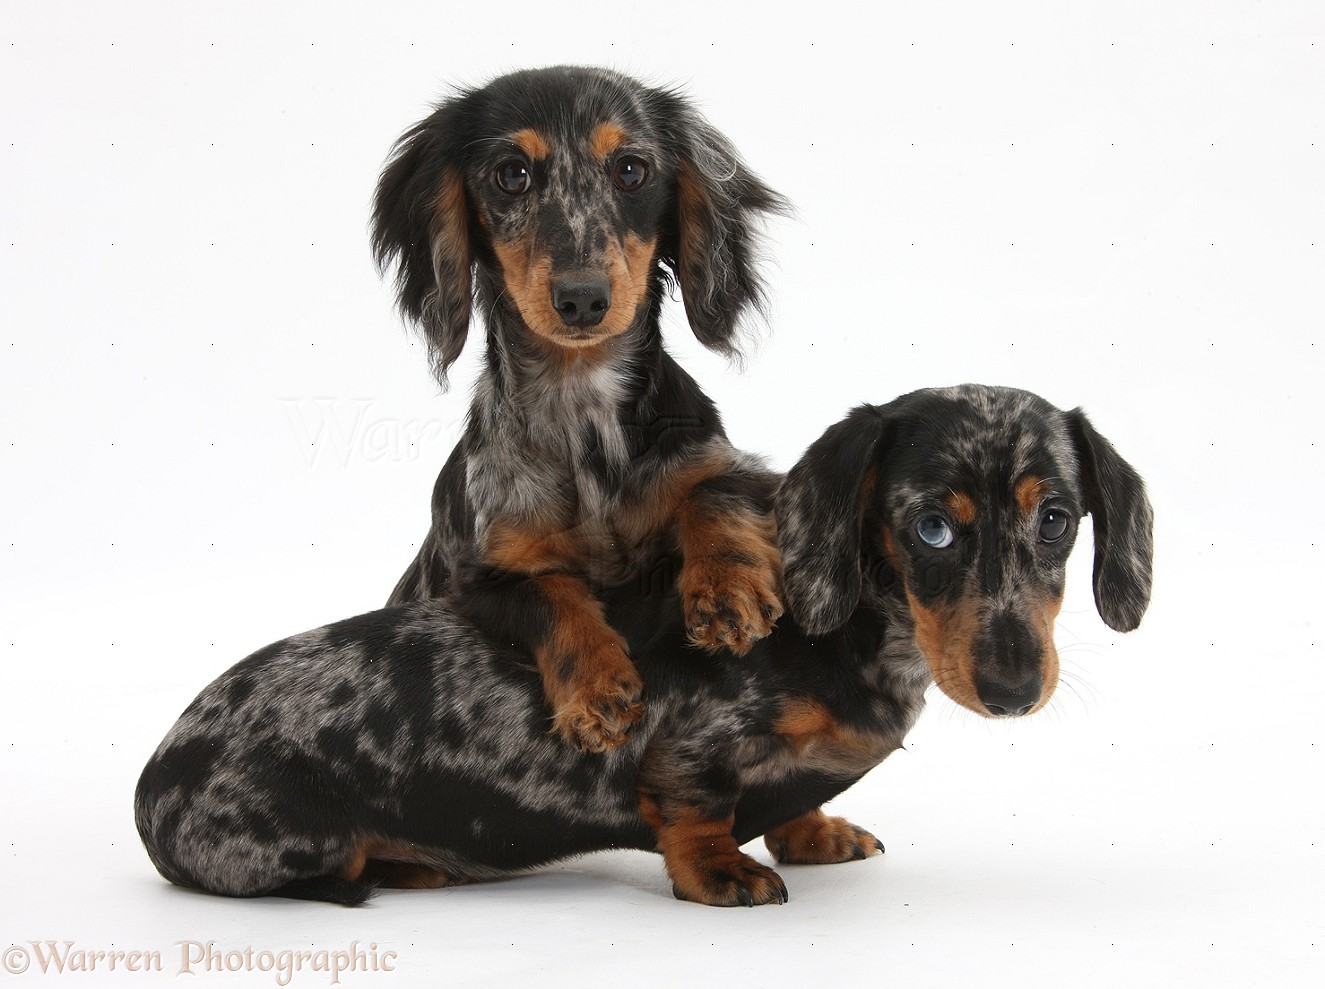 Dogs Two tricolour merle Dachshund pups photo WP33845